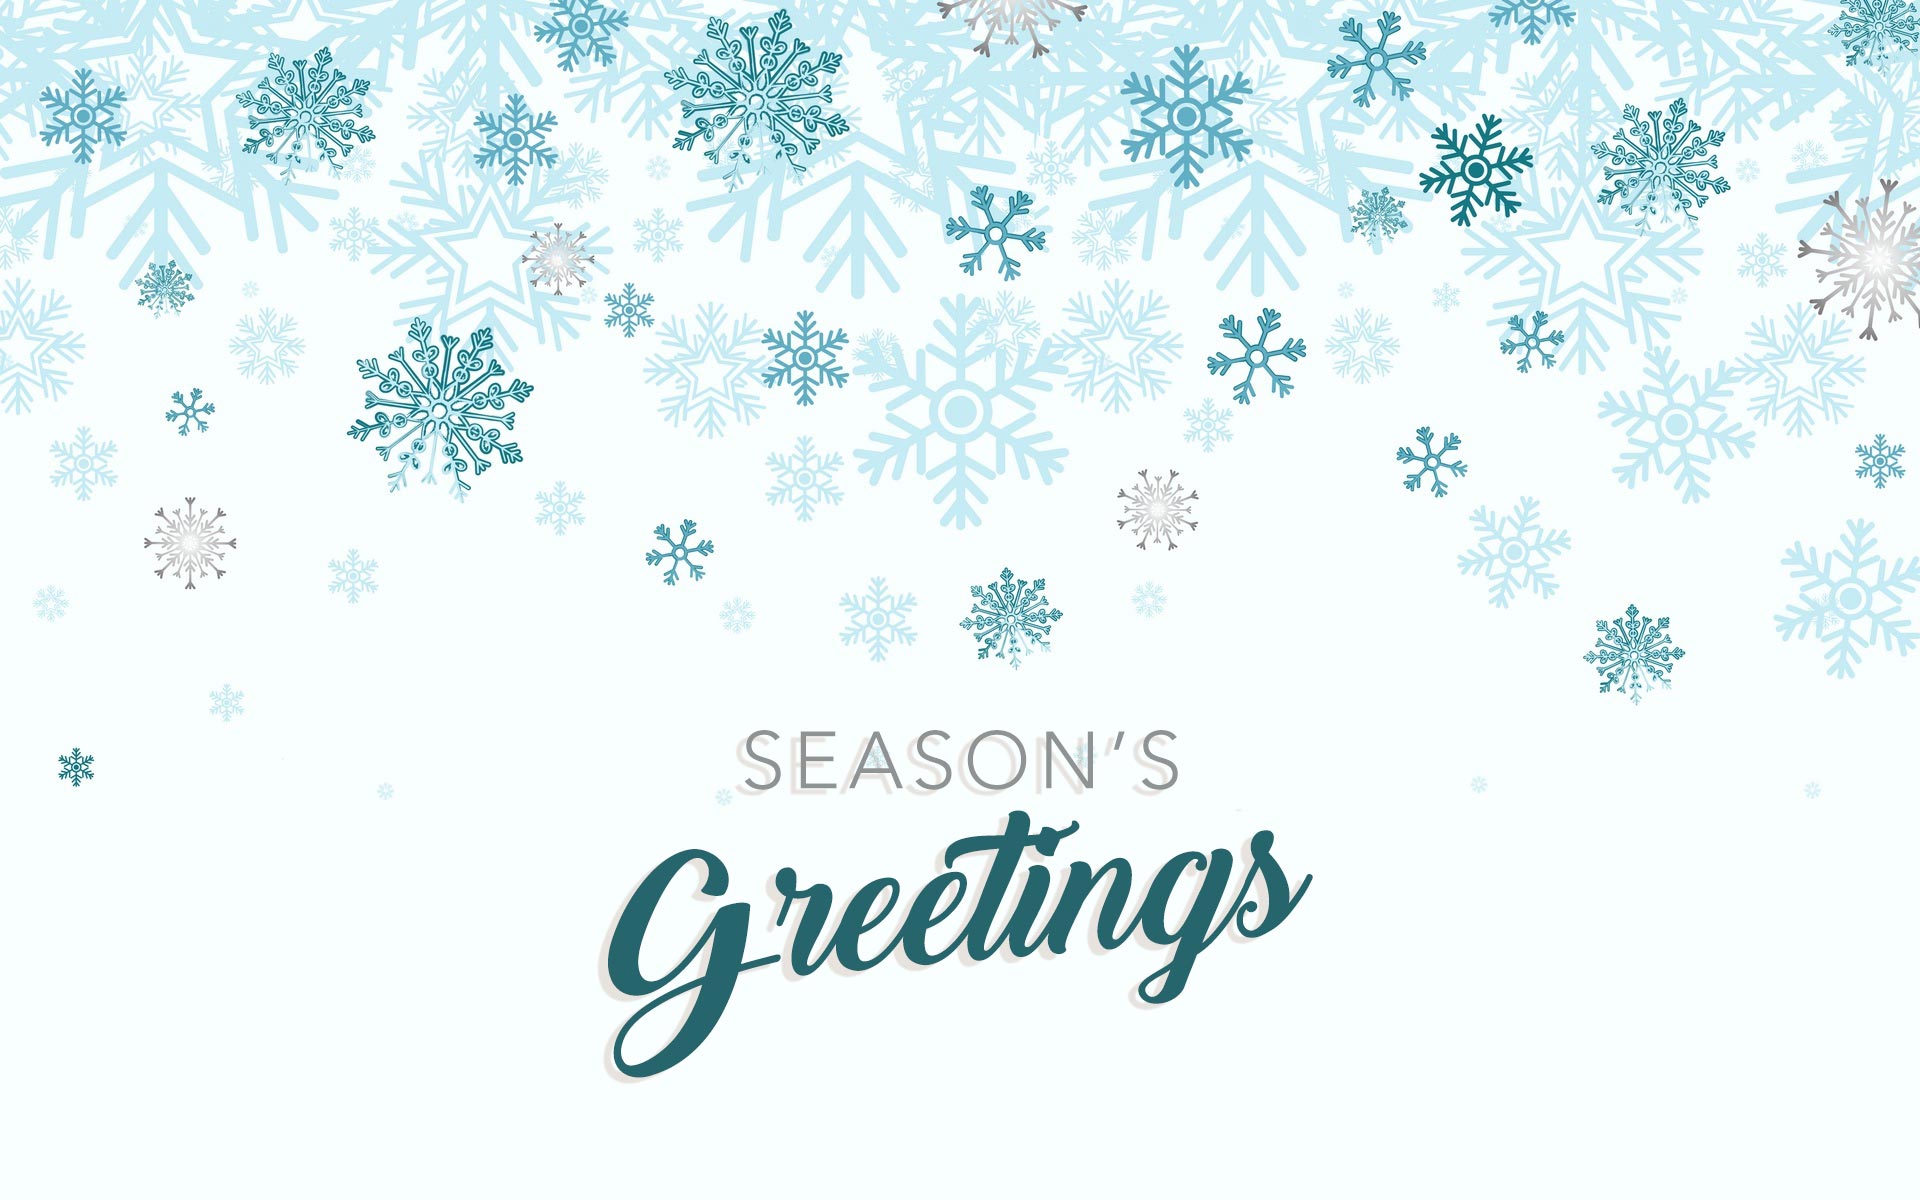 Free download 15 Seasons Greetings Cards Stock Images HD 1920x1200